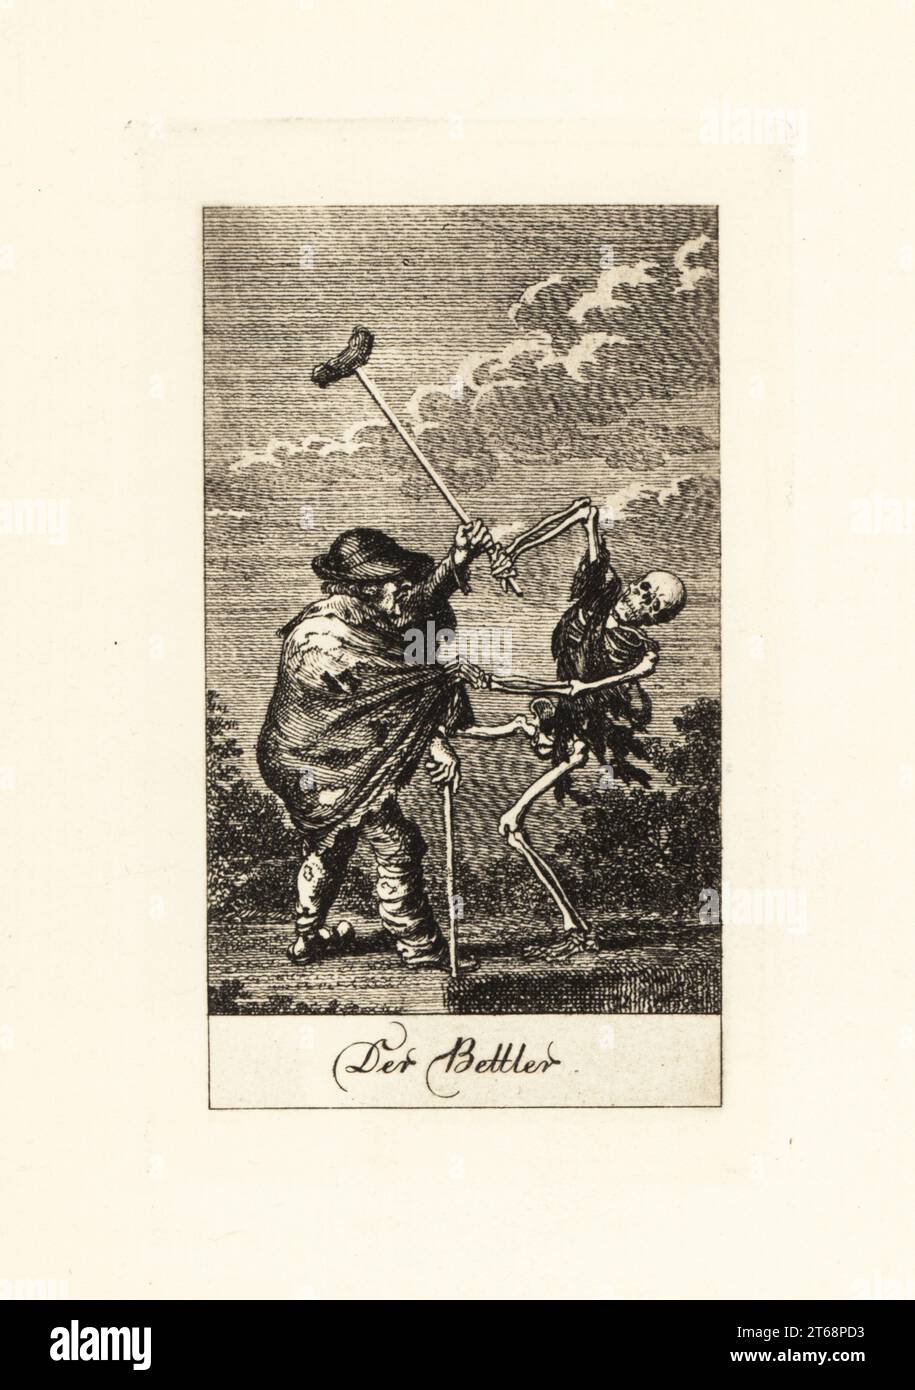 The skeleton of Death attacking a beggar. The beggar tries to hit him with a crutch, but Death kicks him and pulls on his coat. Der Bettler. Copperplate engraving drawn and etched by Daniel Nikolaus Chodowiecki from a series of Dance of Death, originally published in the Lavenburg Calendar in 1792. Reprinted in Totentanz from the original copperplates by Walther Nithack-Stahn, Eigenbrodler Verlag, Berlin, 1926. Stock Photo